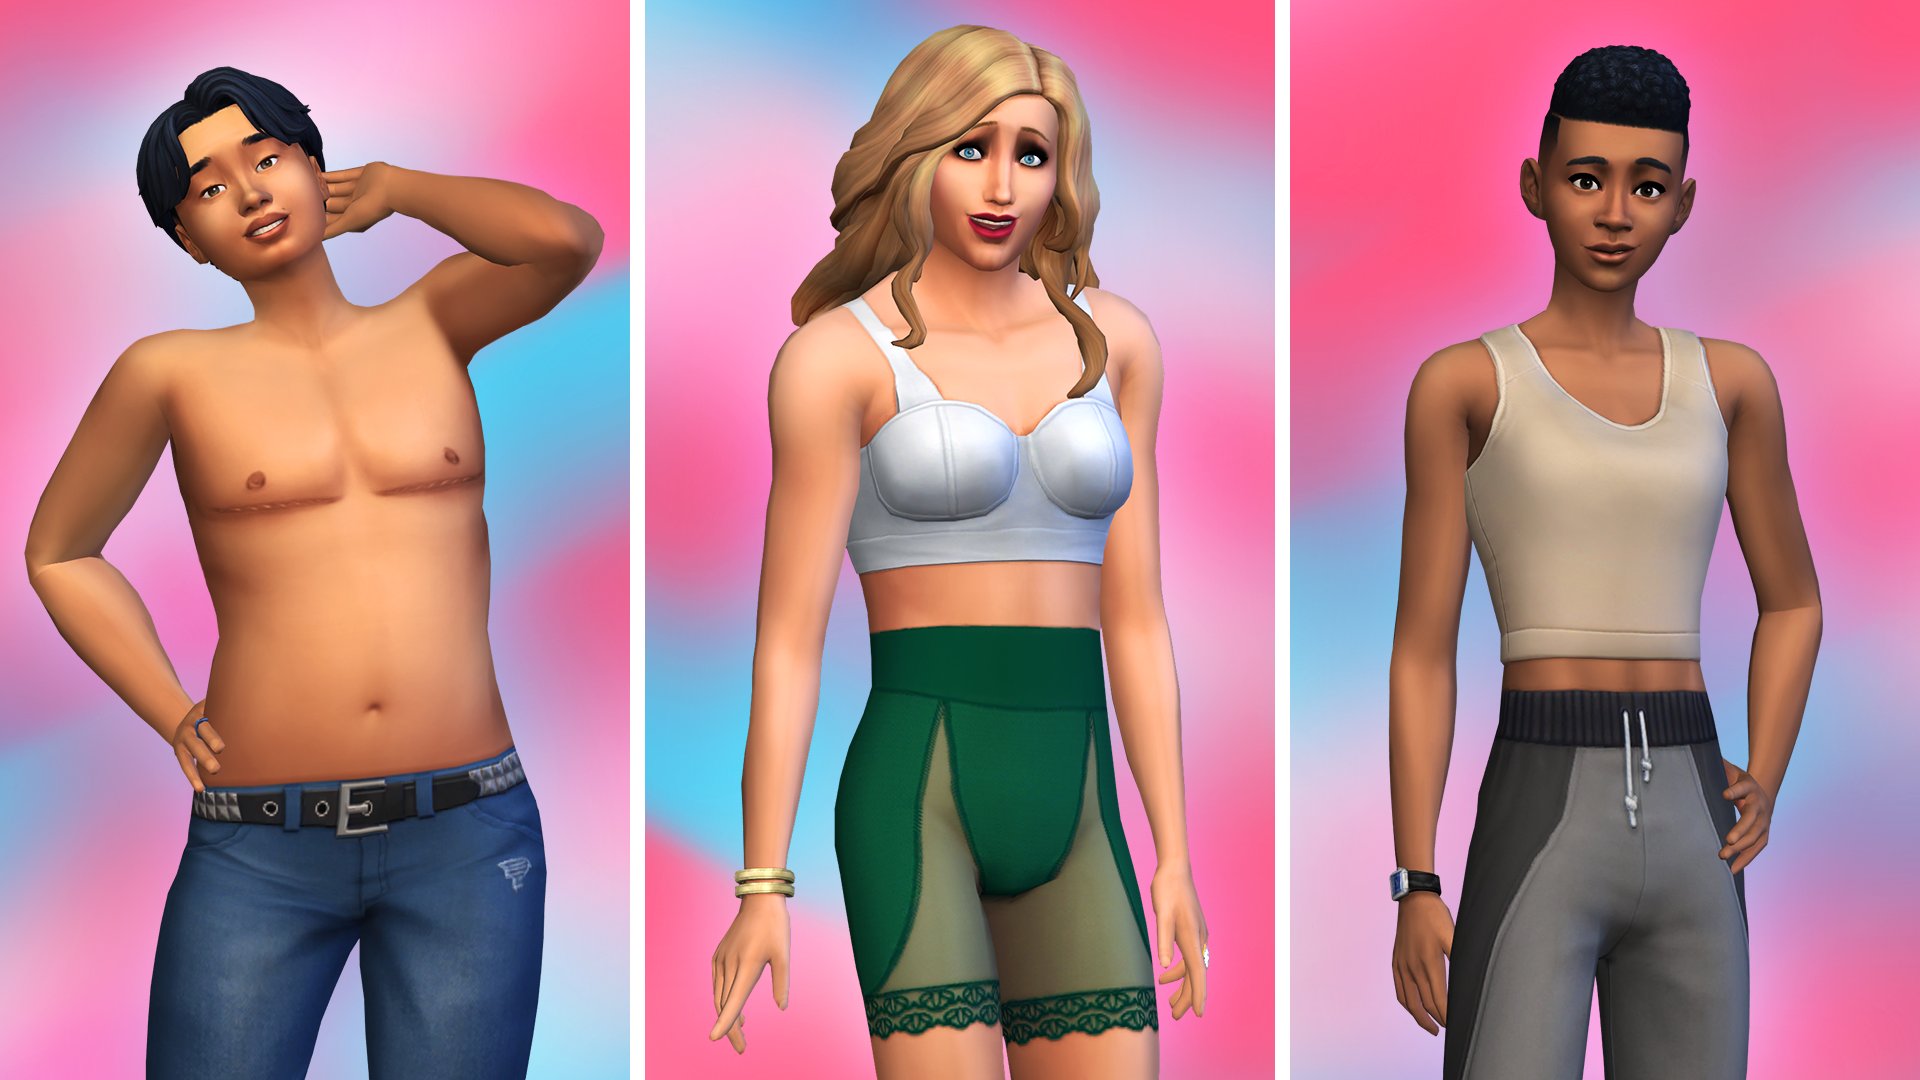 The Sims 4 update adds medical wearables, top surgery scars, and more